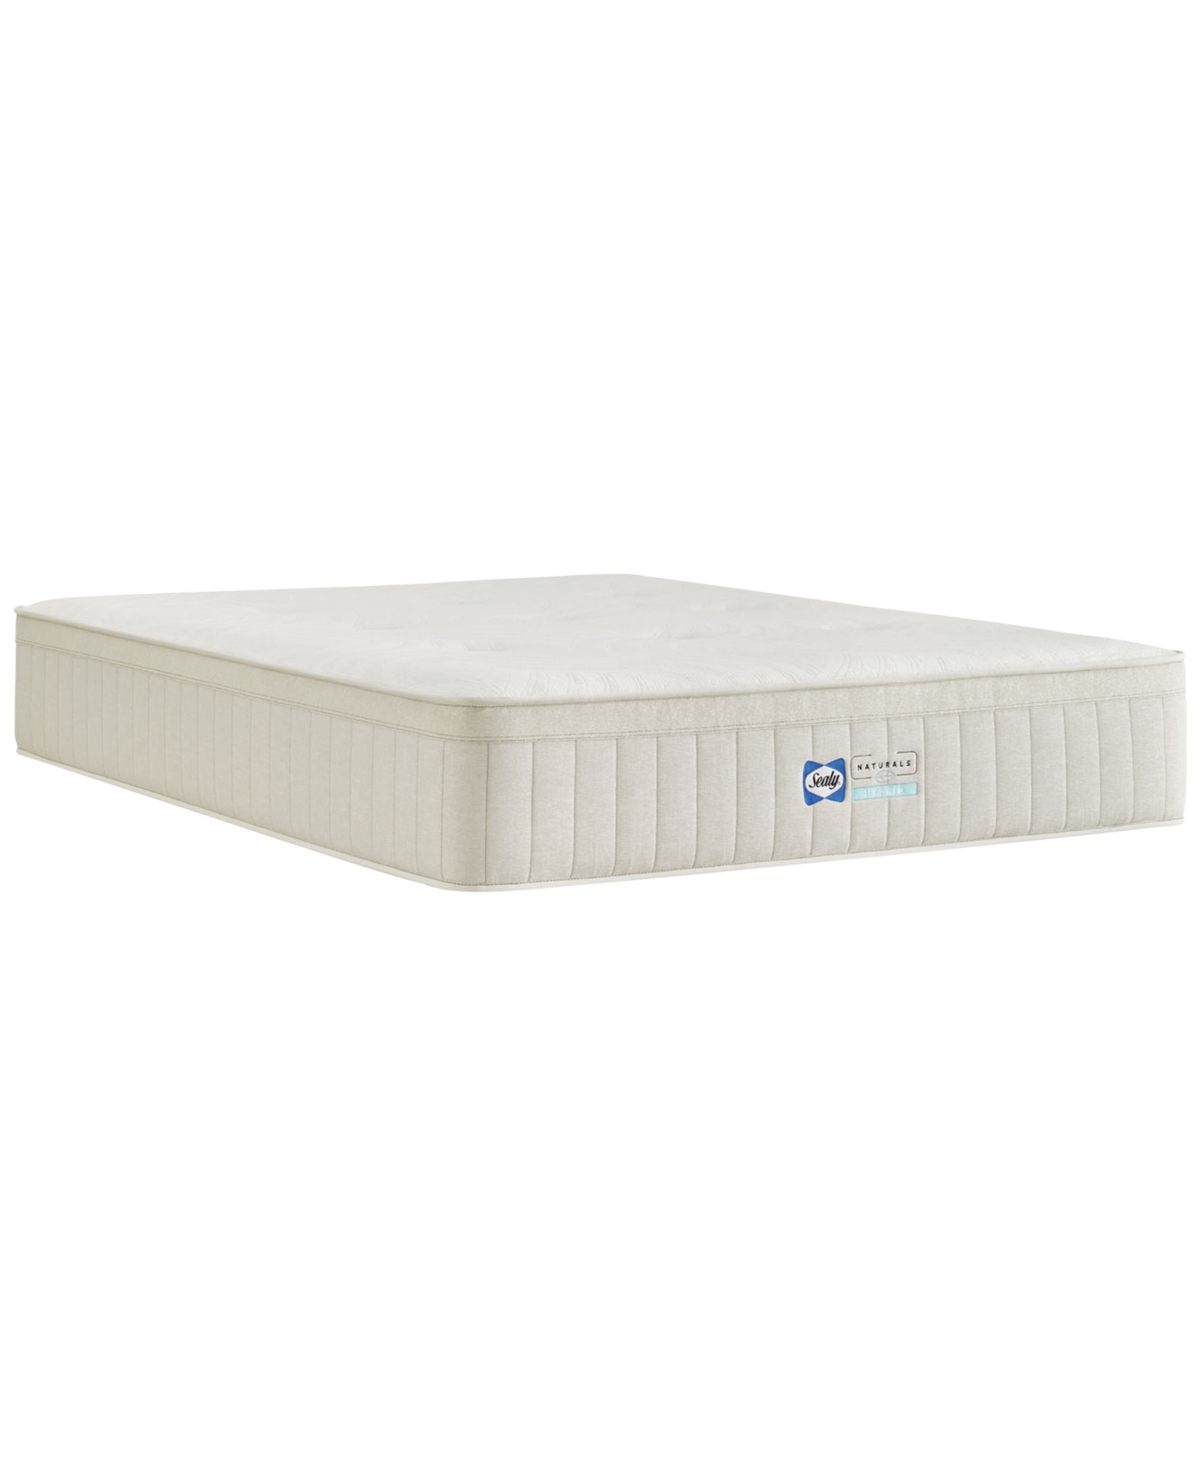 Sealy Naturals Hybrid Soft Tight Top 13" Mattress, Full In White